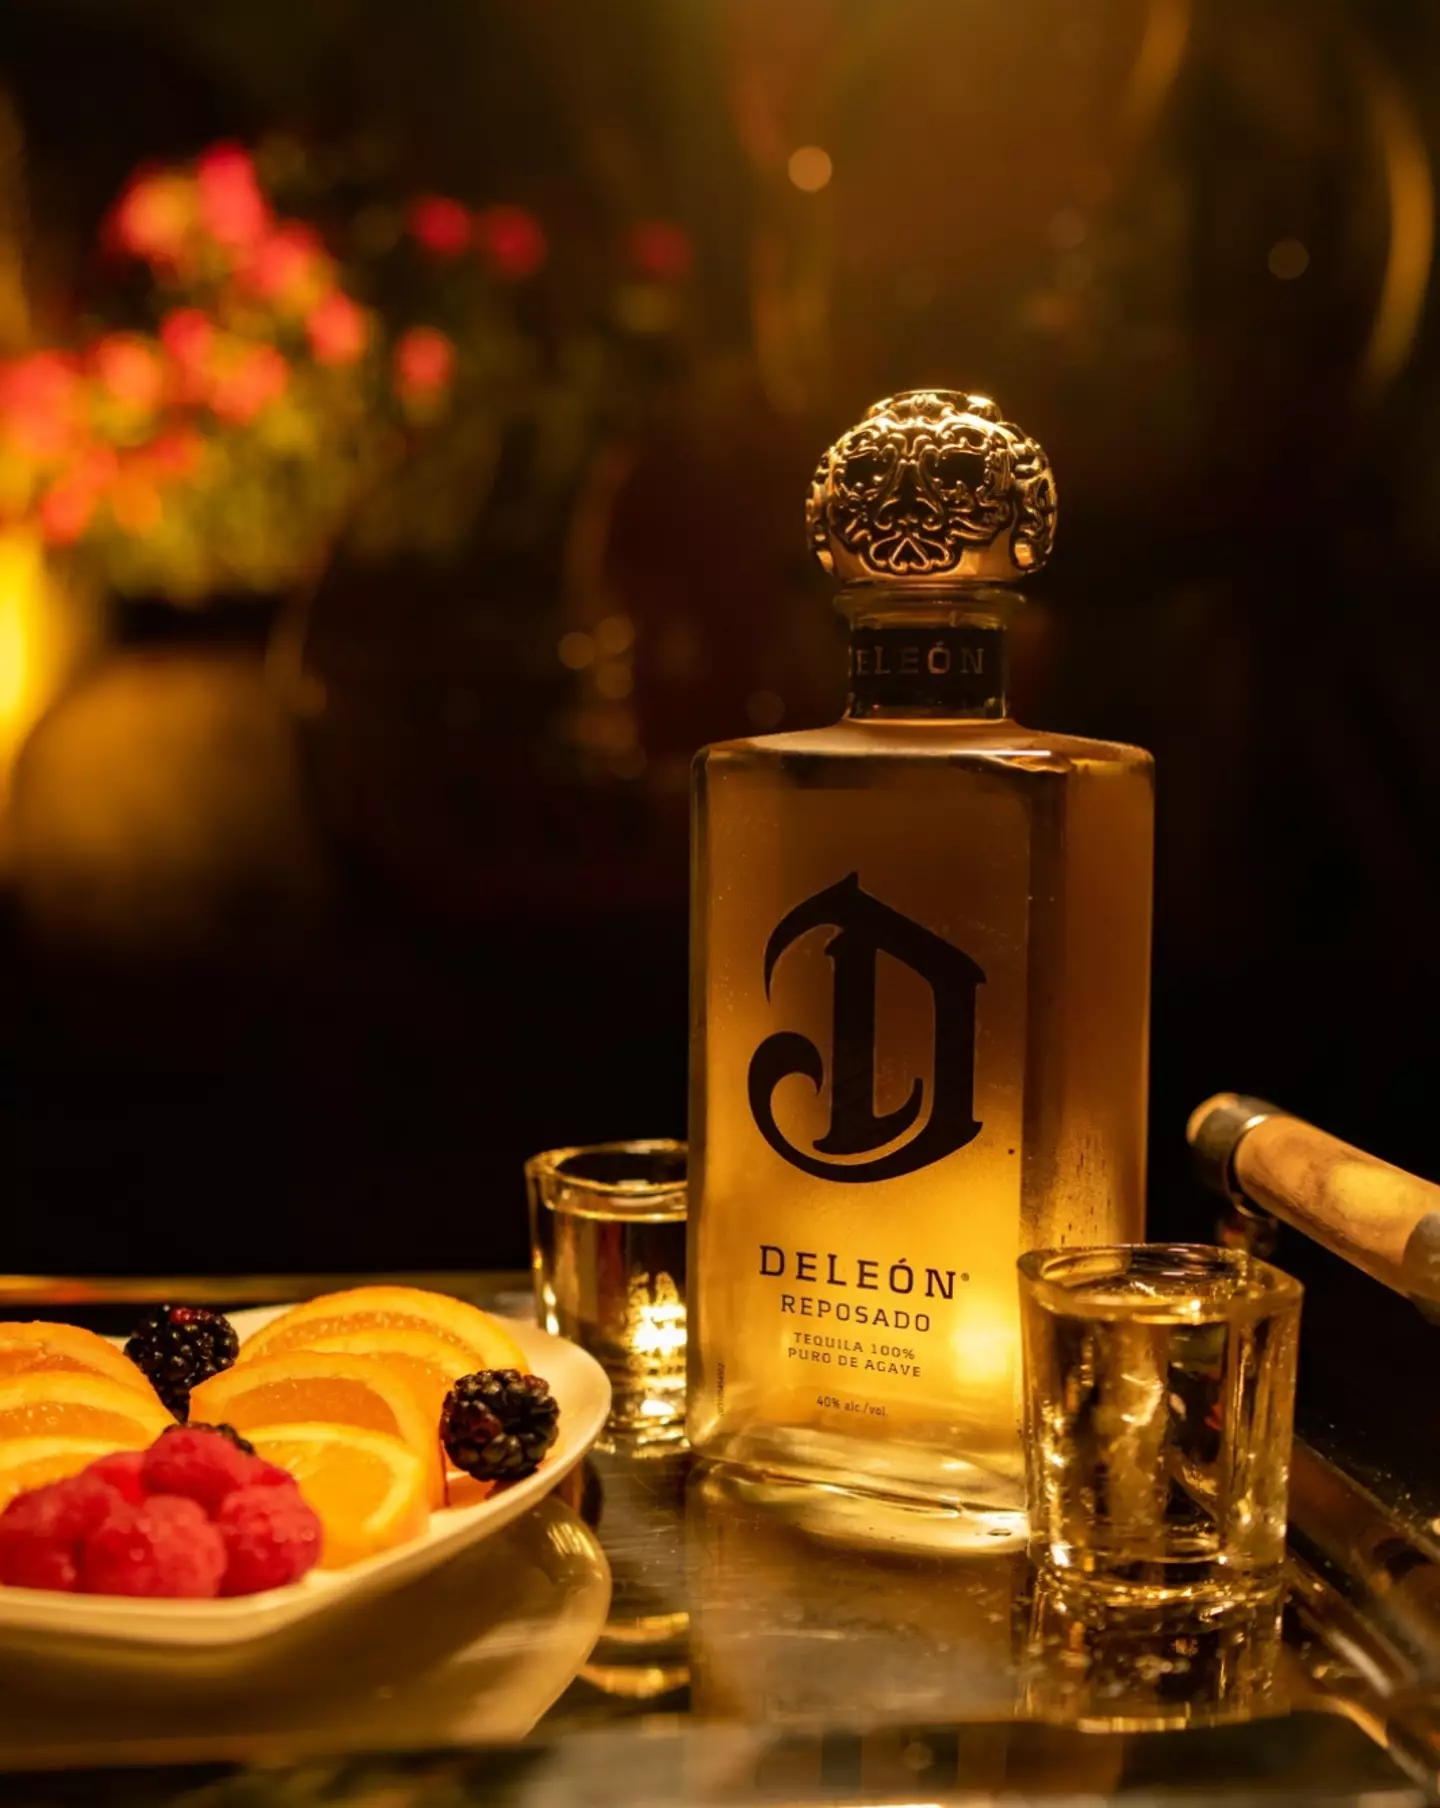 Combs bought DeLeon tequila with Diageo as a 'joint venture' in 2013.